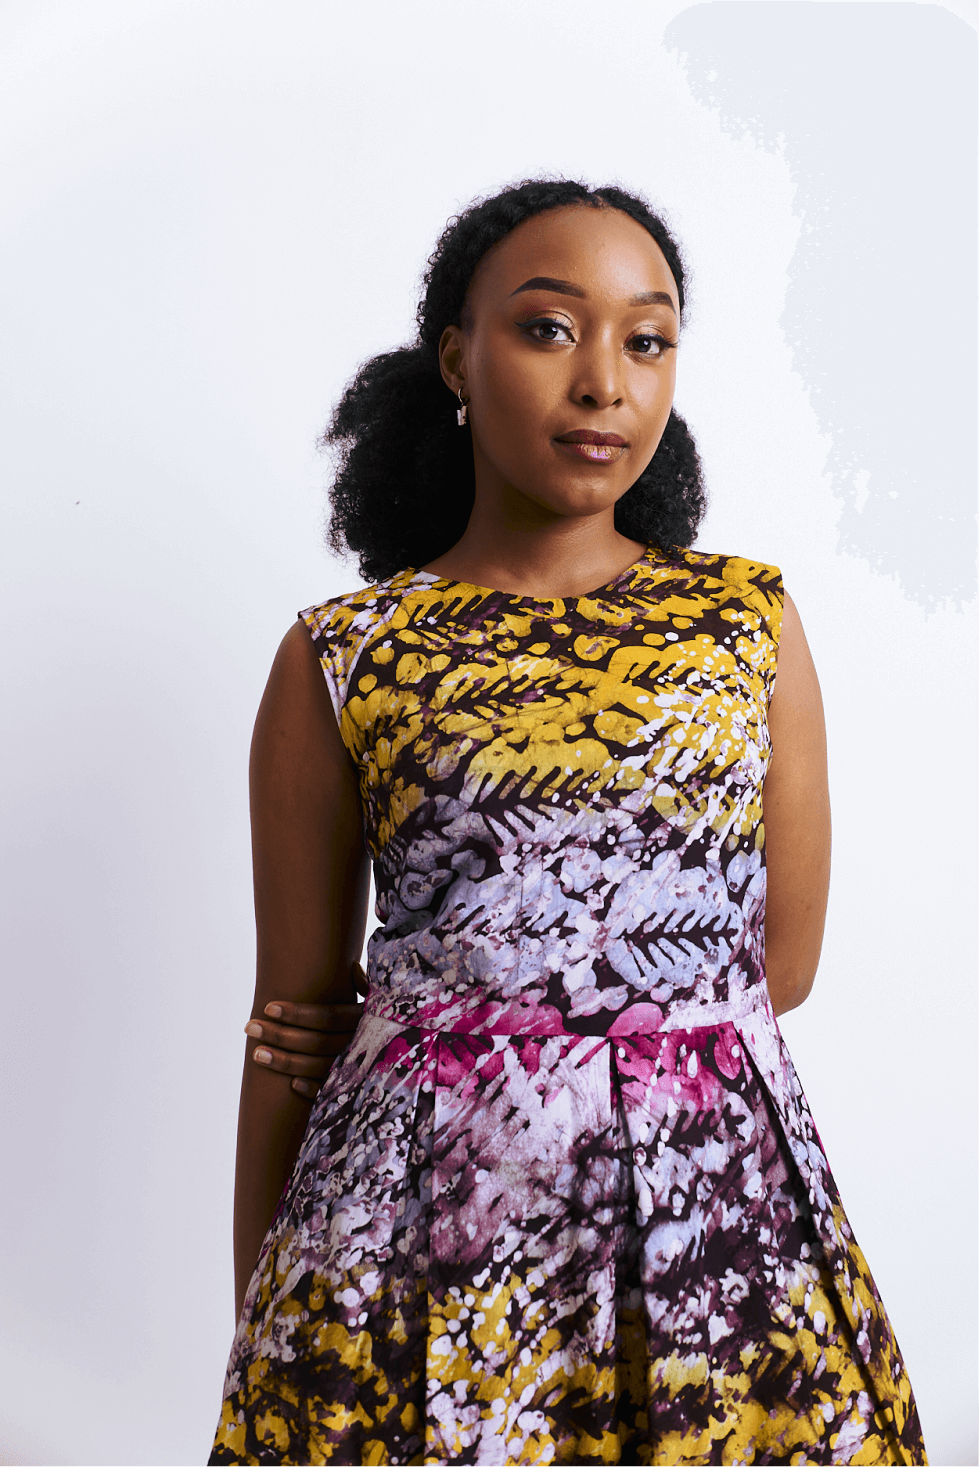 Shop Wendo Multicoloured Print Skater by The Fashion Frenzy on Arrai. Discover stylish, affordable clothing, jewelry, handbags and unique handmade pieces from top Kenyan & African fashion brands prioritising sustainability and quality craftsmanship.